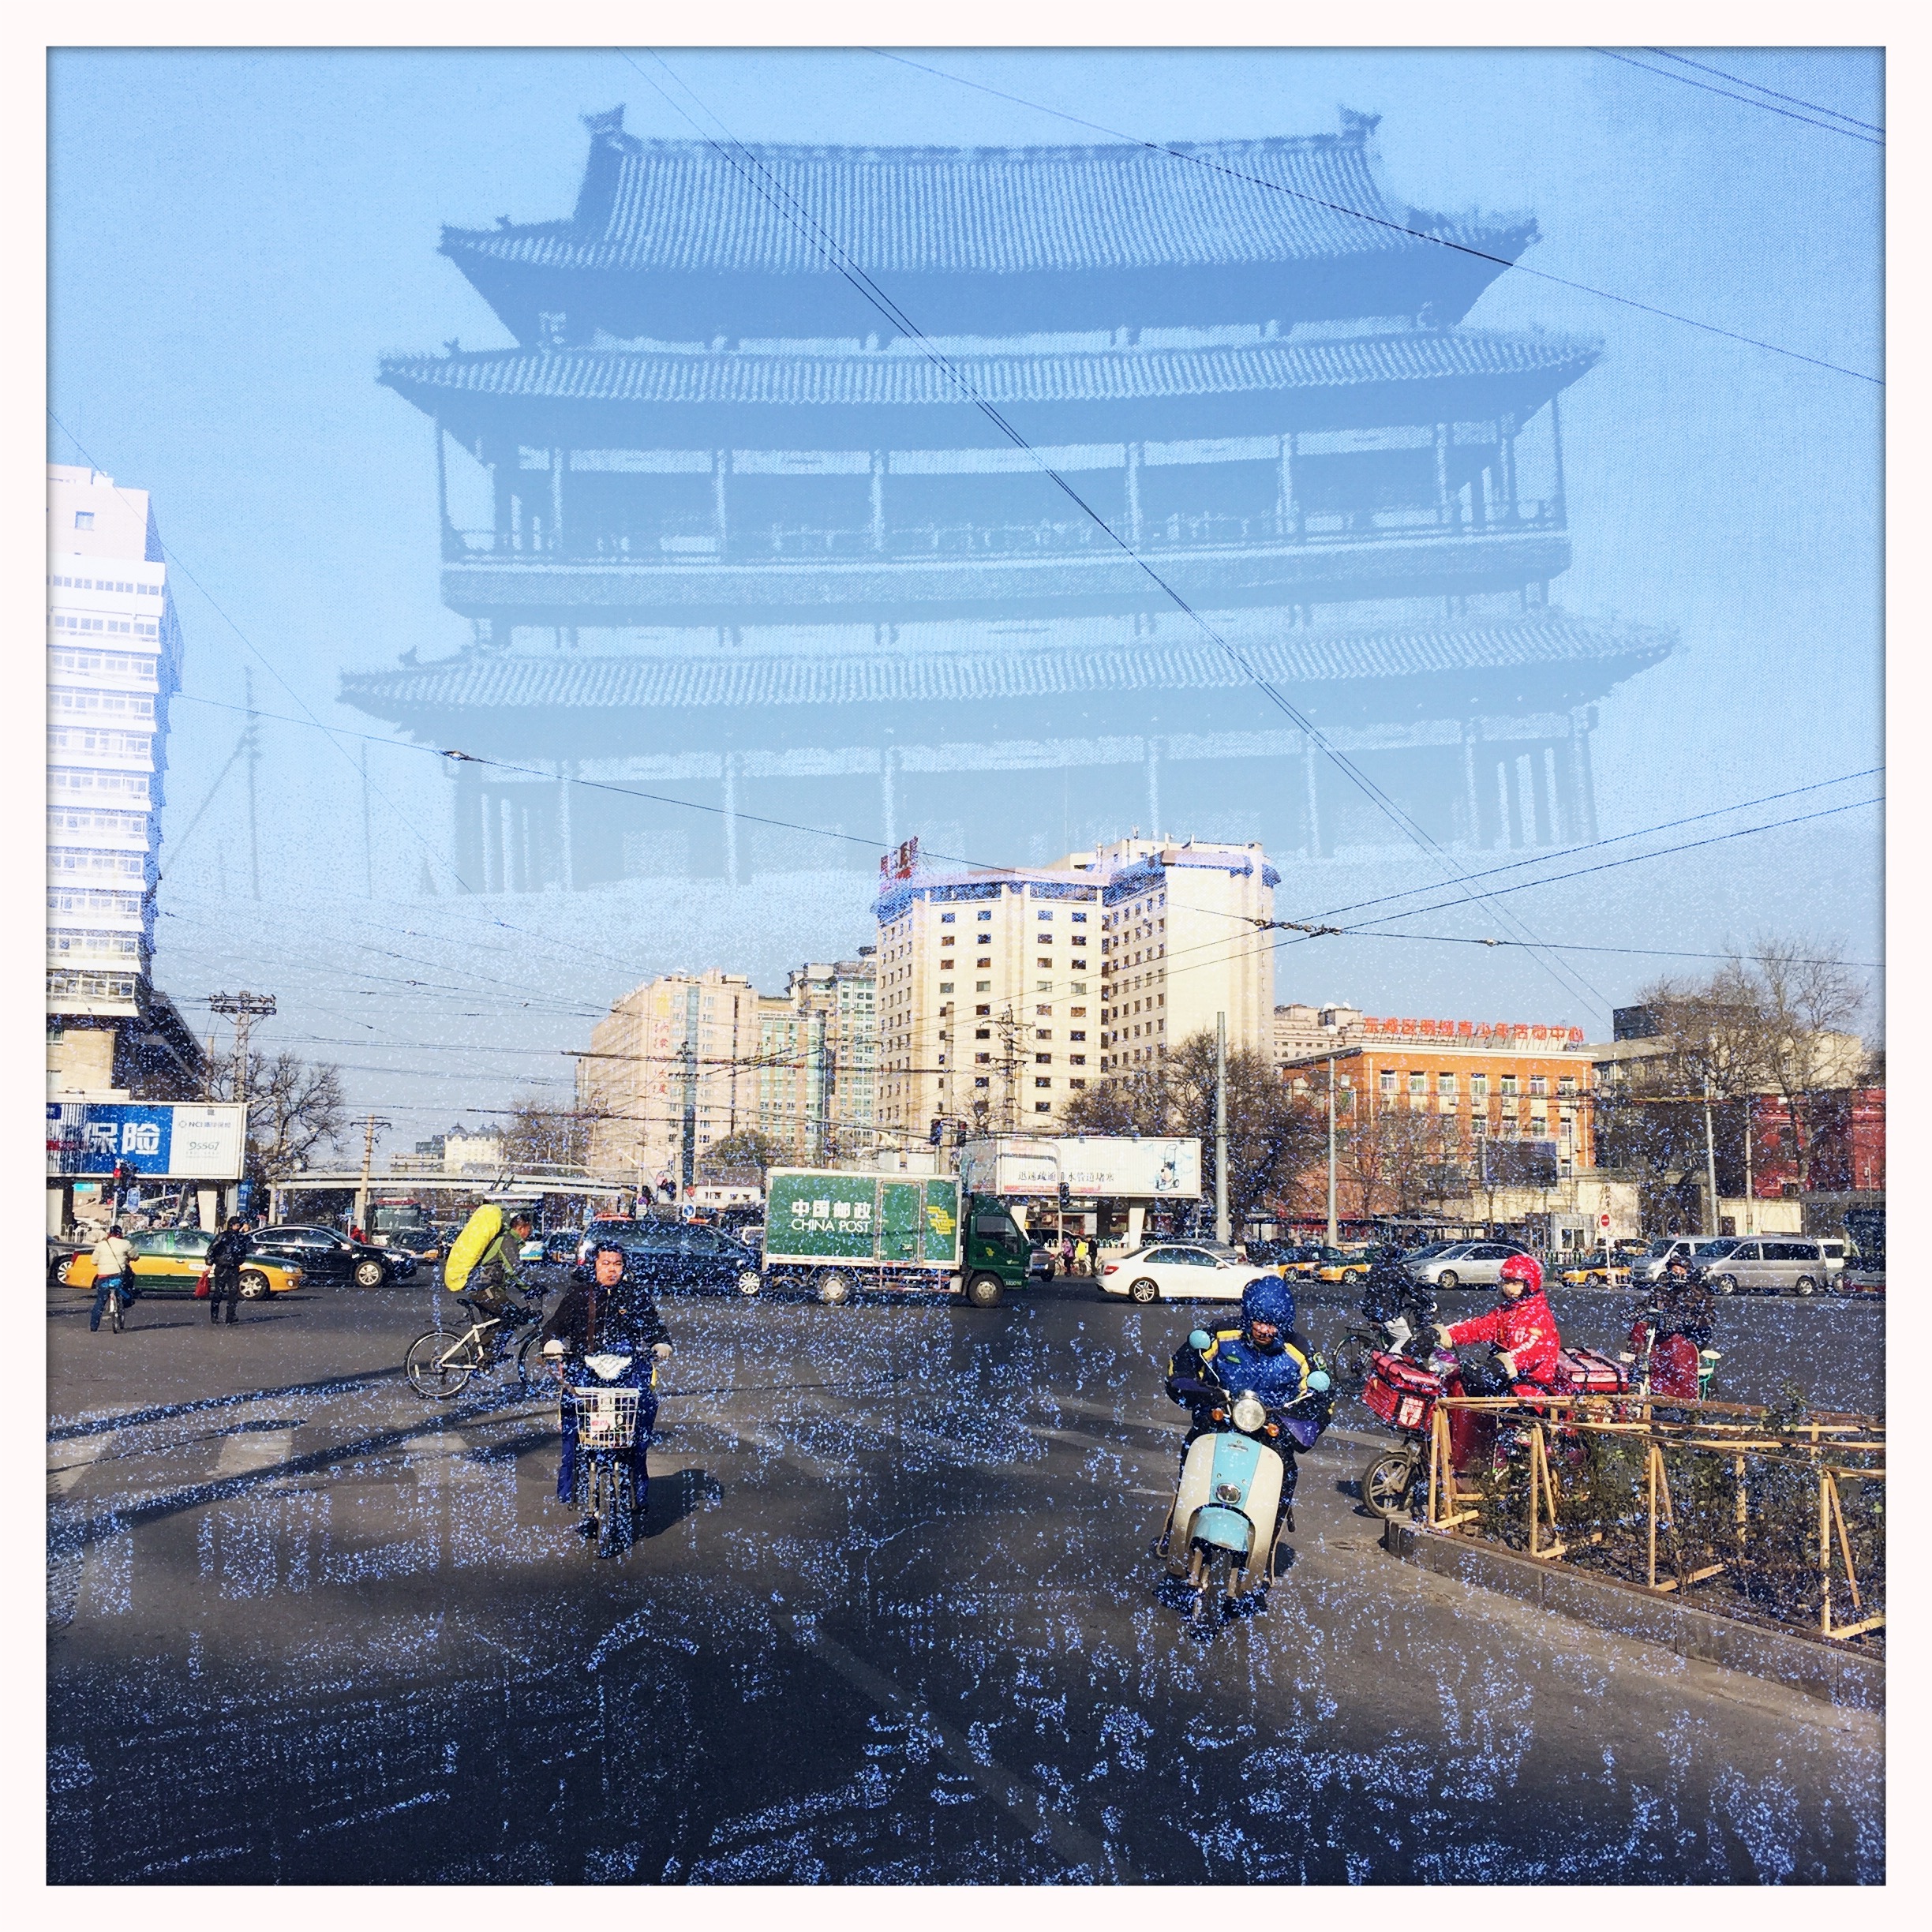 A double-exposure photo taken with an app on iPhone shows the demolished Chongwenmen Gate Tower and Chongwenmen area, where the gate tower used to be located, in nowadays. Chongwenmen gate tower was demolished in 1968. Beijing's old city gates are not only the exits and entrances of cities, but also the defense installations. City gates were a system of a series of defense buildings, including the gate tower, enclosure, embrasured watchtower, and lock tower. Due to the wars after the fall the Qing dynasty, as well as the city development, the city gates were not well maintained and many of the enclosures and embrasured watchtowers were destroyed because of the road and railway construction, or other urban development projects. In 1950s and 1960s, most gate towers were demolished when Beijing constructed its No. 2 loop line subway. The layout of Beijing in Ming and Qing dynasties was consisted of three parts: Imperial City, Inner City and Outer City. Imperial City is the core which is e